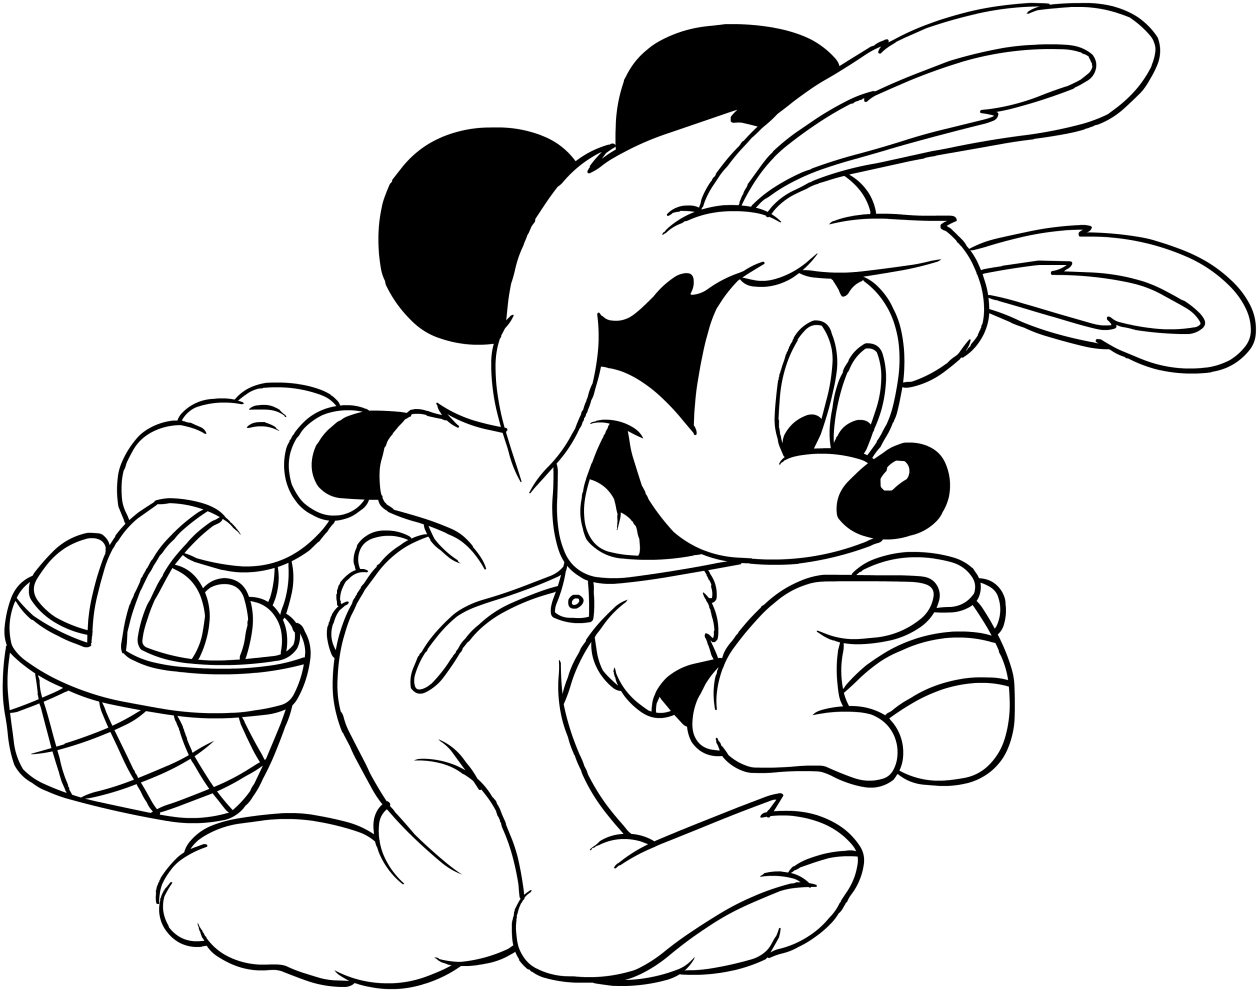 Mickey Mouse rabbit easter coloring page to print